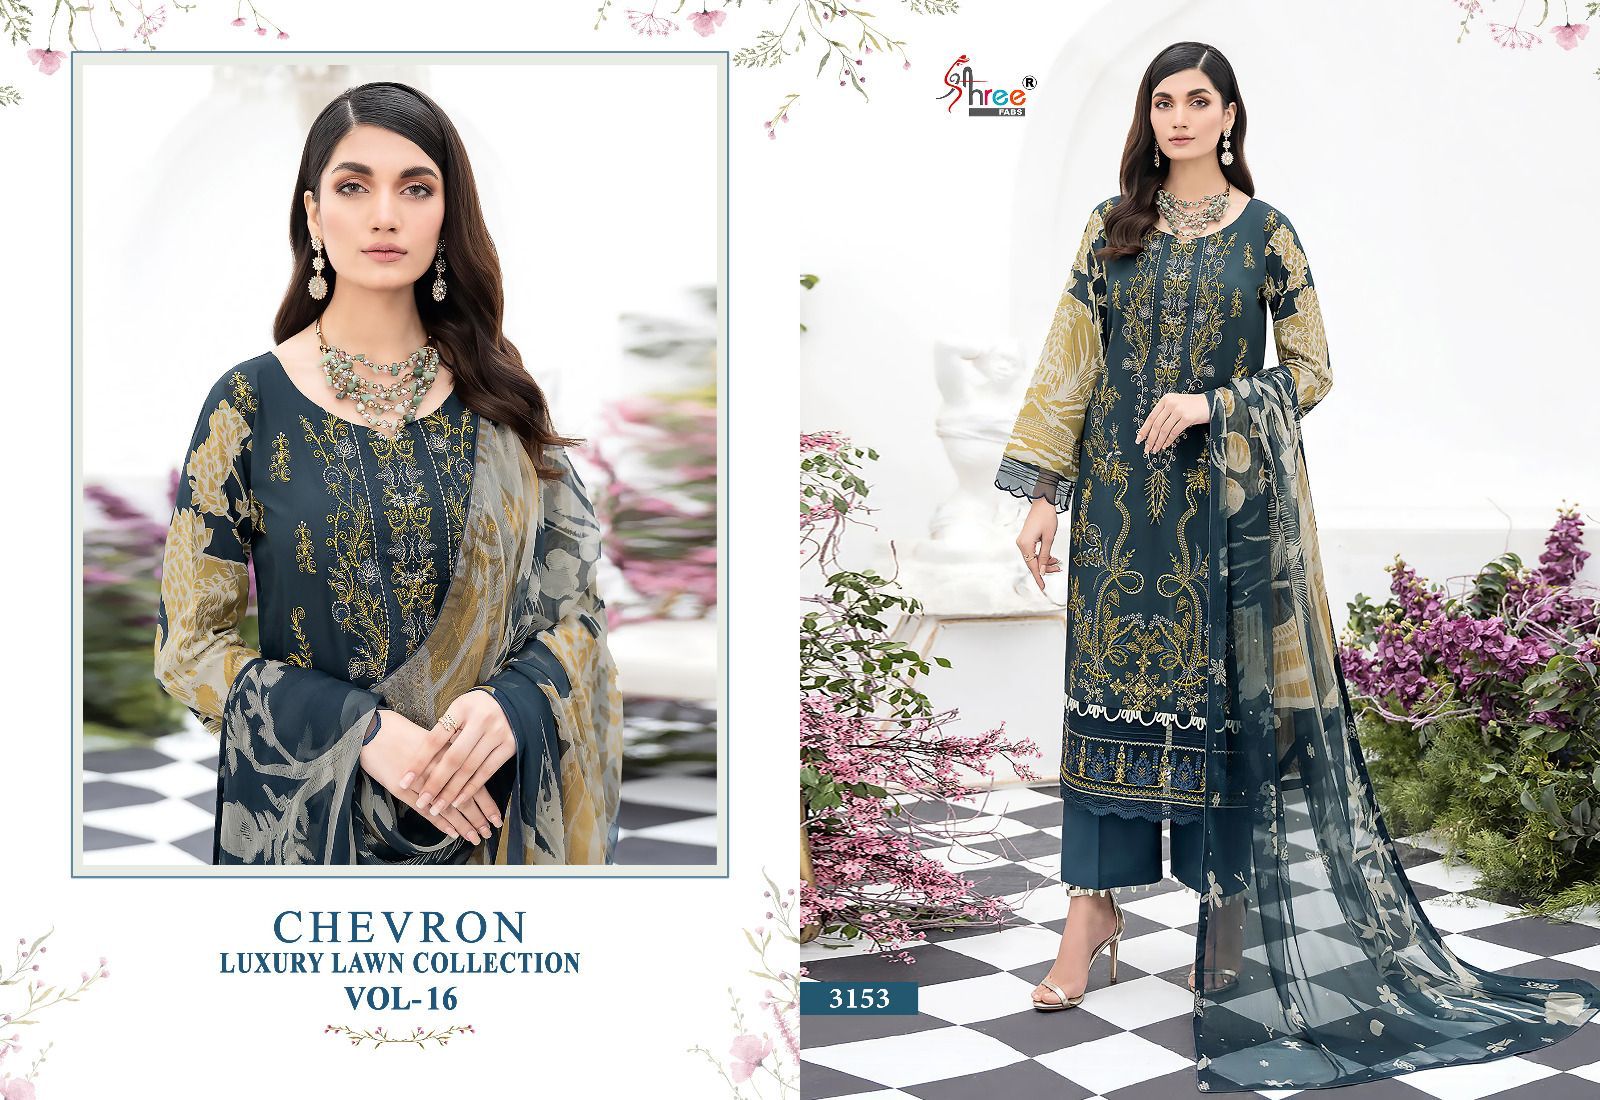 Shree Chevron Luxury Lawn Collection Vol 16 collection 6